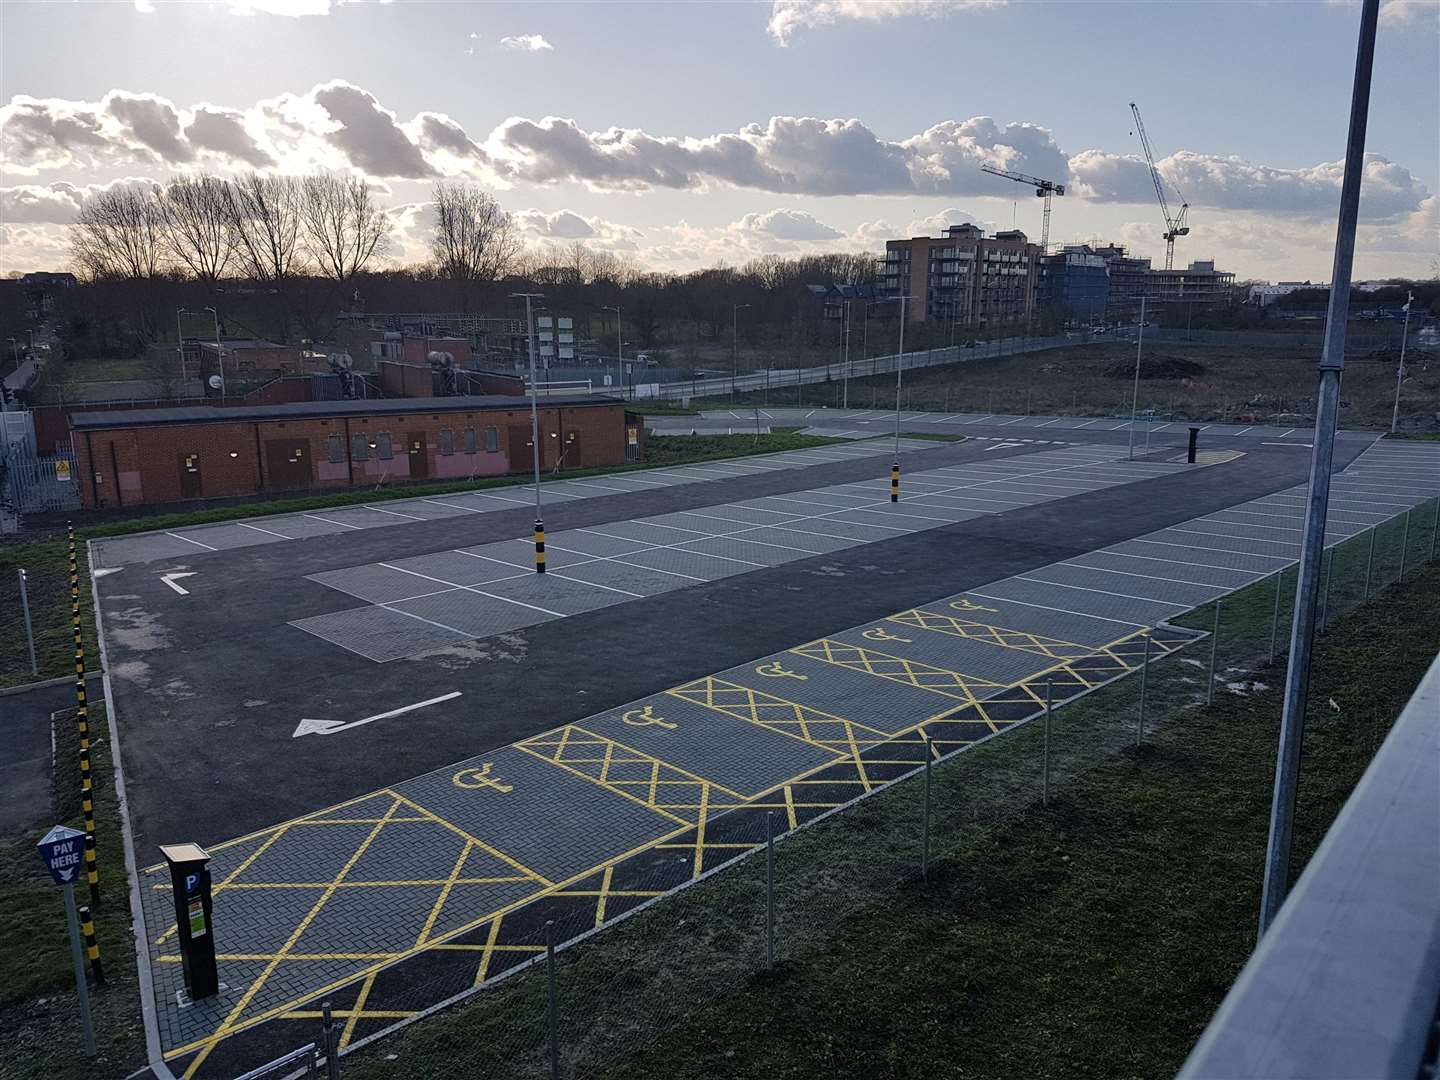 Despite opening on Monday, the Victoria Road Car Park is empty